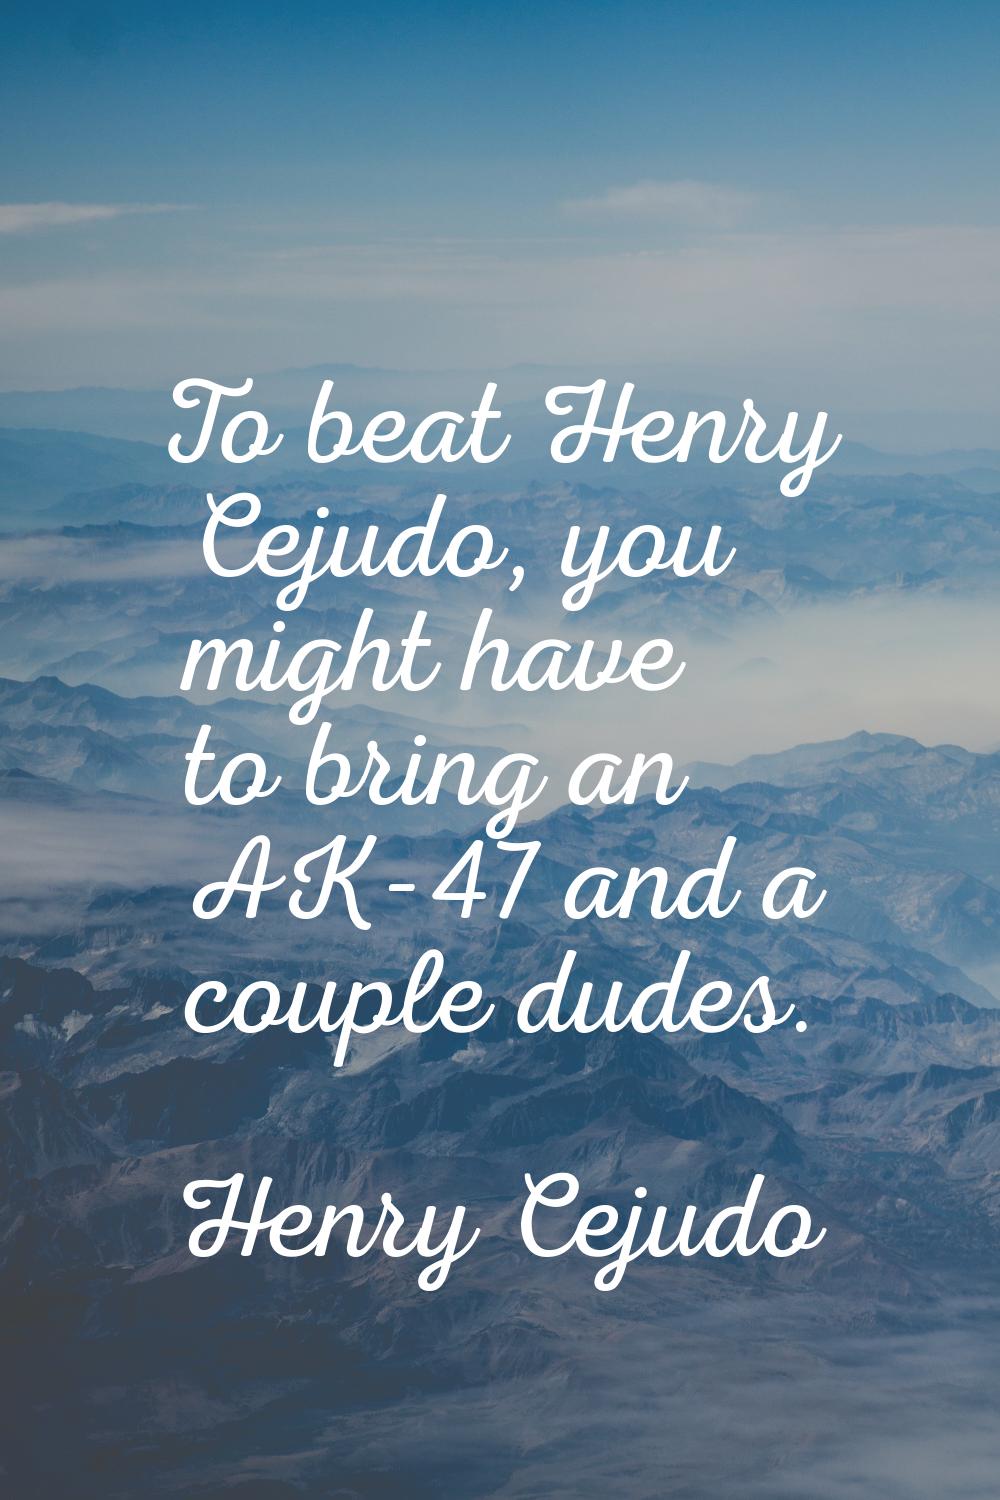 To beat Henry Cejudo, you might have to bring an AK-47 and a couple dudes.